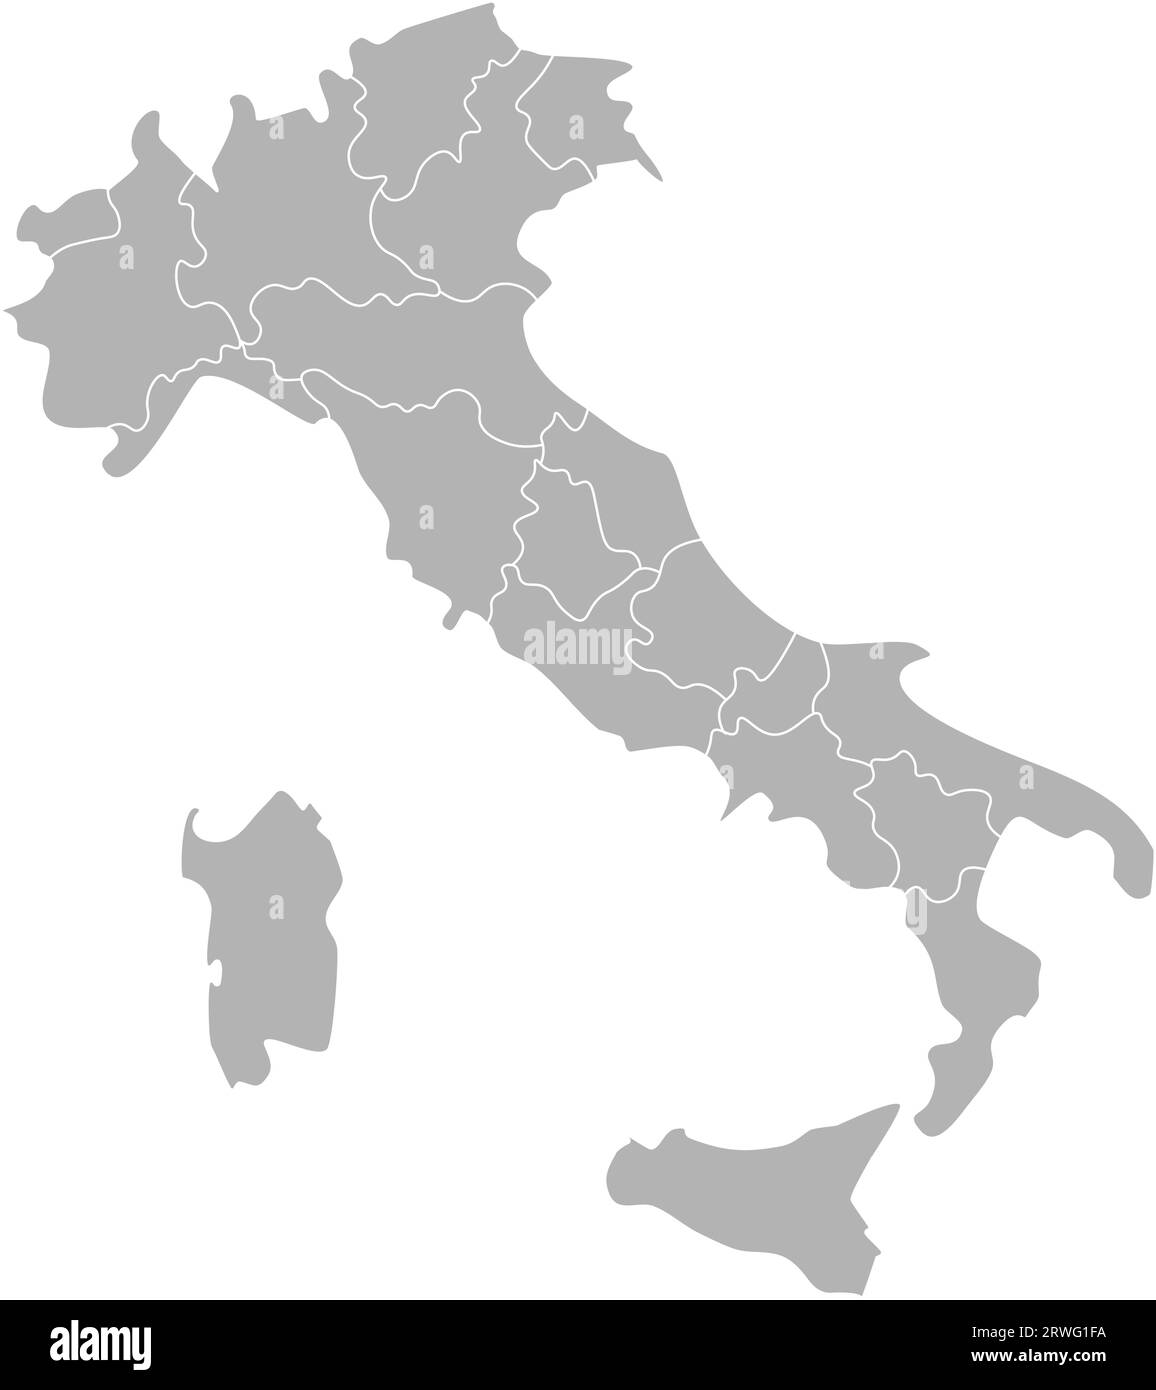 Vector isolated illustration of simplified administrative map of Italy. Borders of the provinces (regions). Grey silhouettes. White outline. Stock Vector